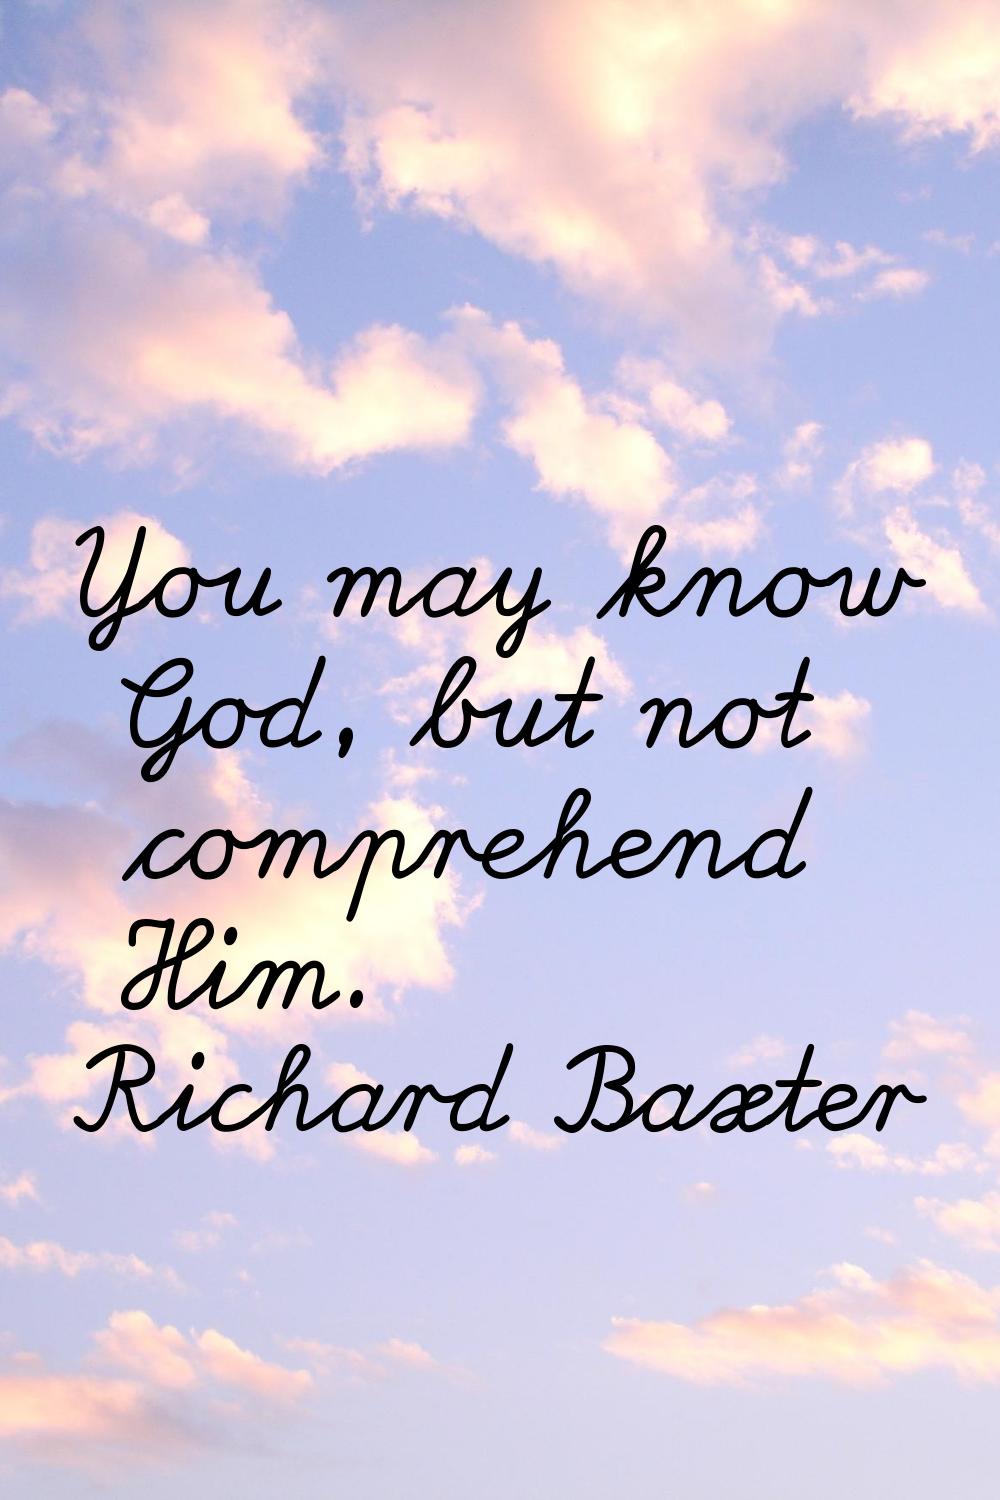 You may know God, but not comprehend Him.